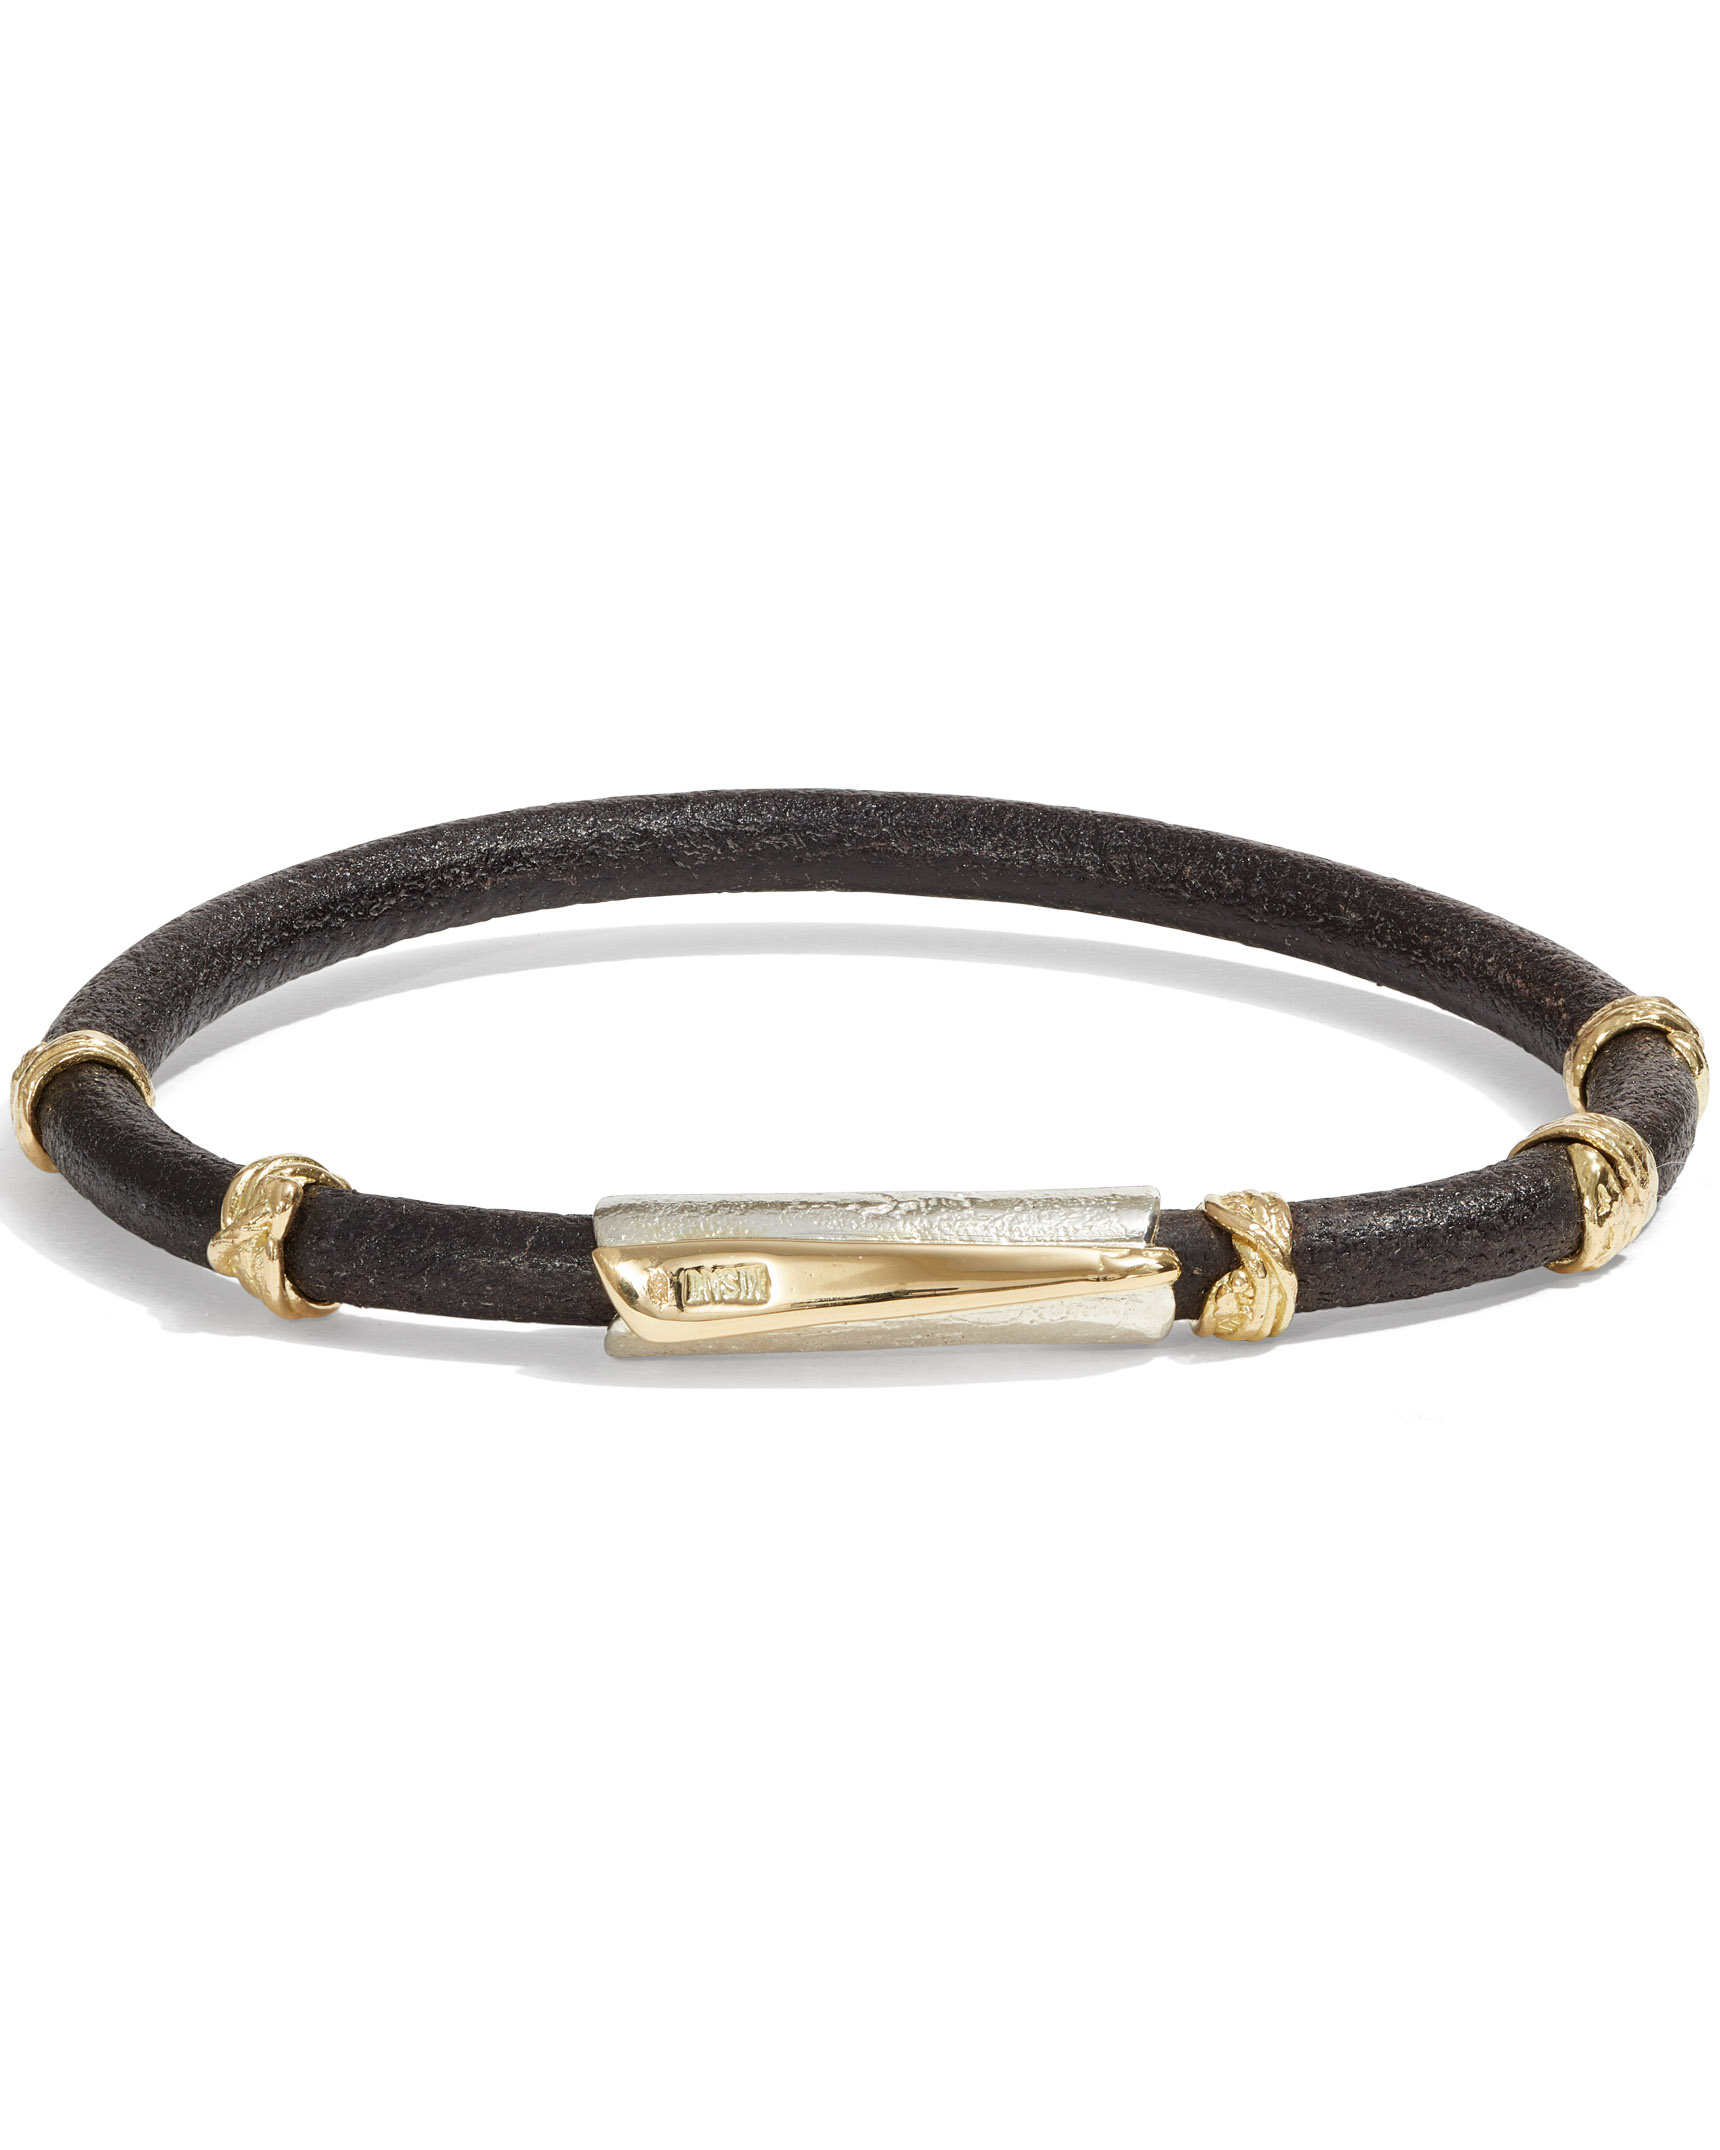 Round Leather, Yellow Gold and Silver Bracelet - Turgeon Raine